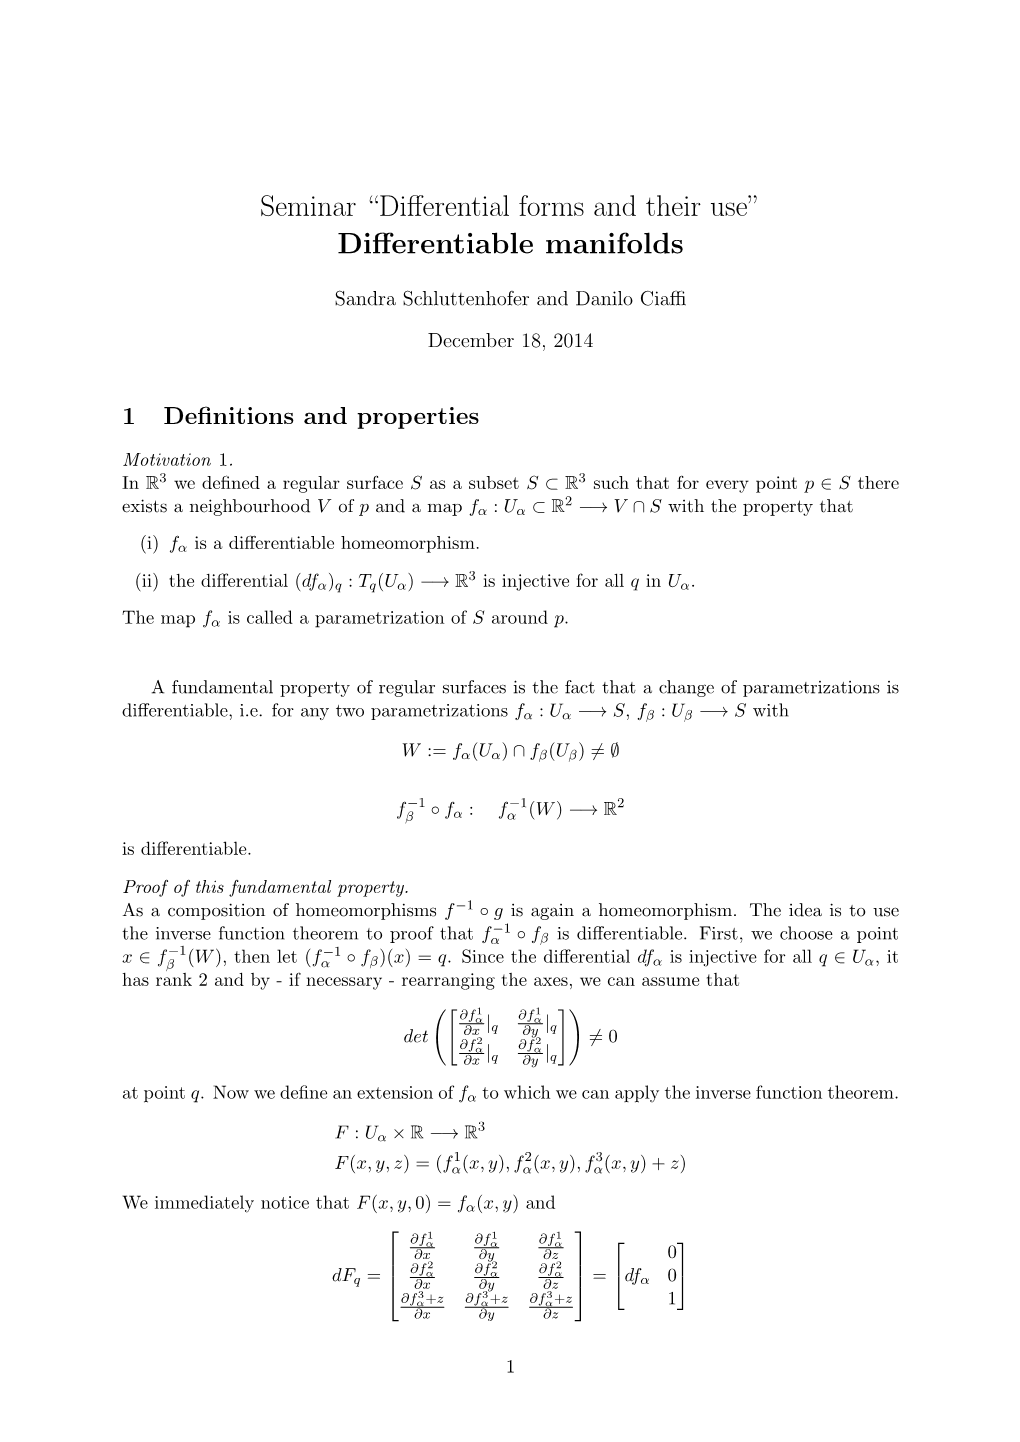 Seminar “Differential Forms and Their Use” Differentiable Manifolds